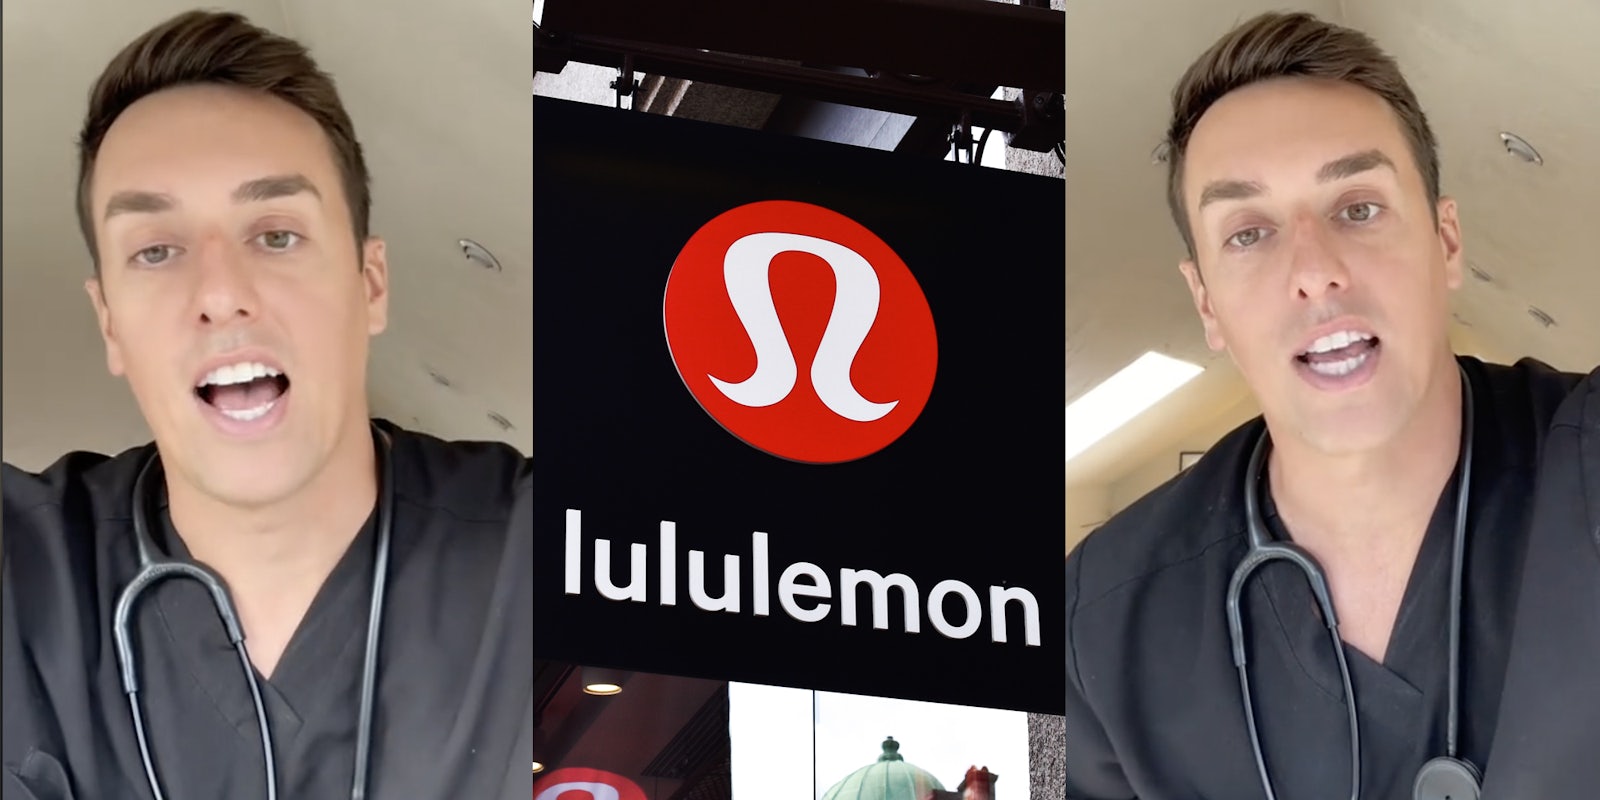 Physician Assistant Calls Out Lululemon for Discount Policy